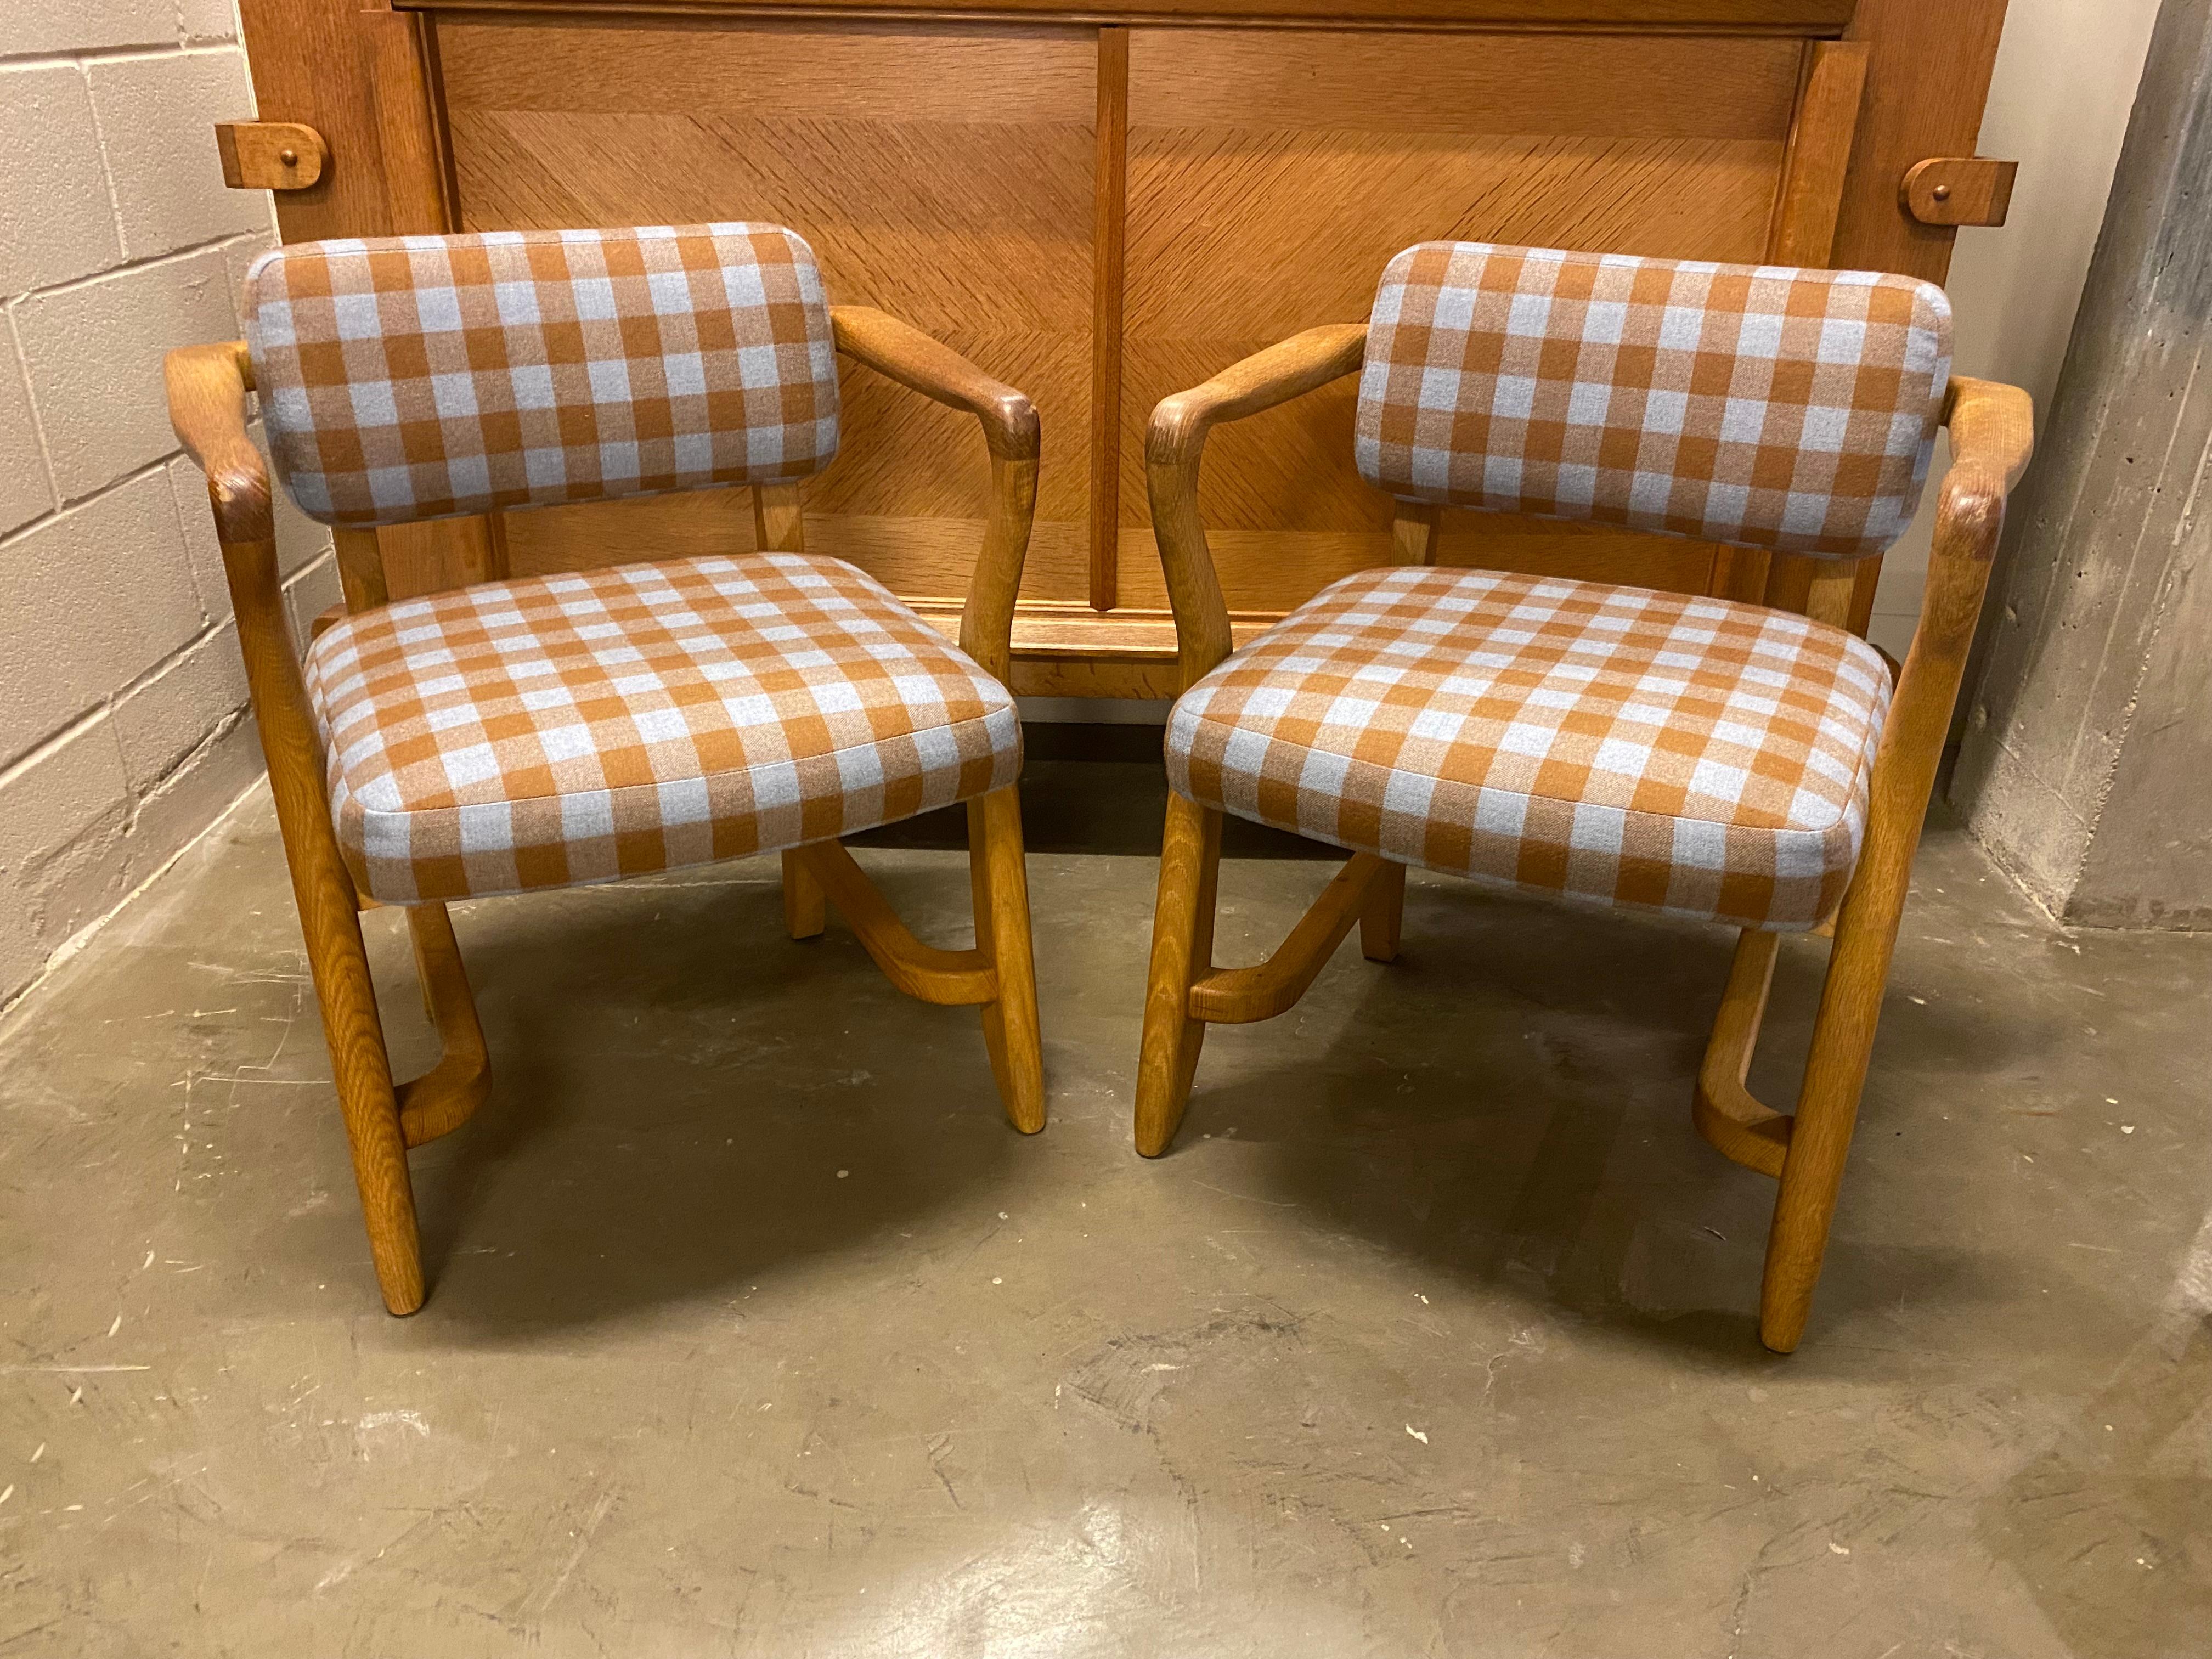 Charming pair of solid French oak armchairs by collectable design duo, Guillerme et Chambron. New custom upholstered seats and backs in Holland and Sherry wool plaid. Chairs are quite comfortable and sturdy and fabric is soft to the touch. France,